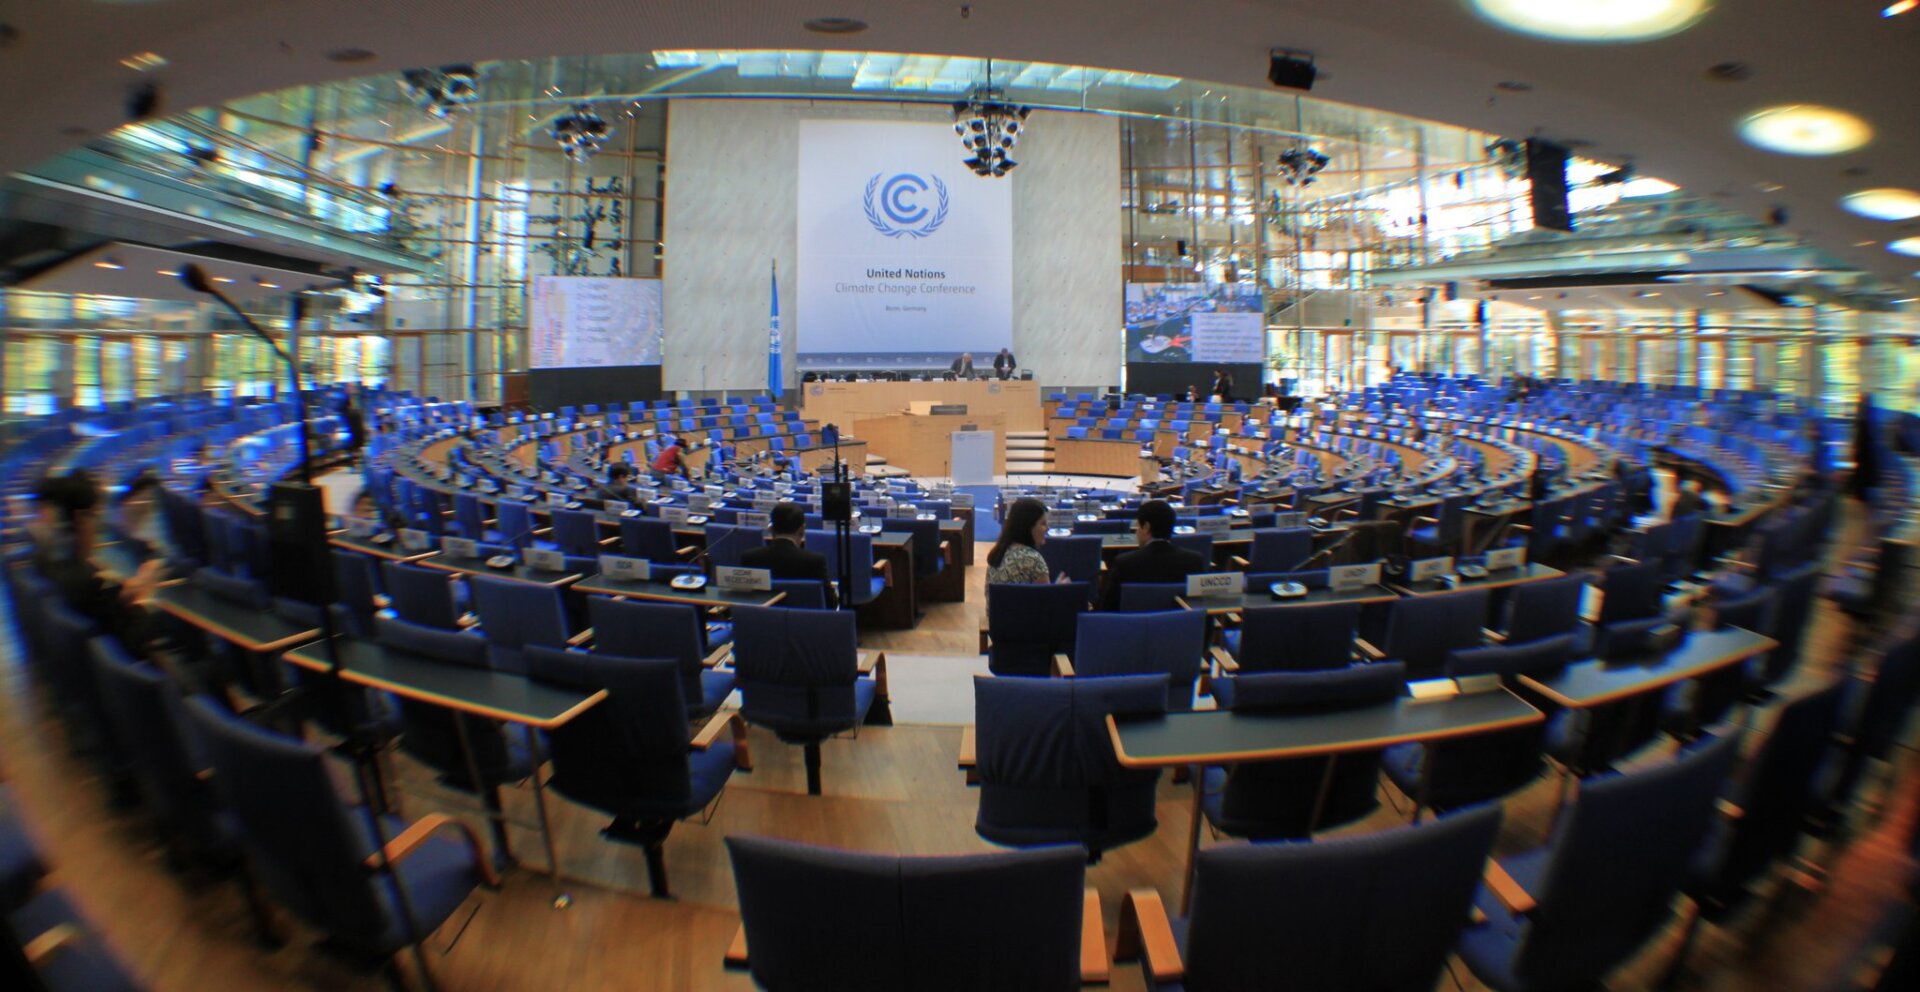 Plenary hall on Day 1 of the Bonn Climate Change Conference